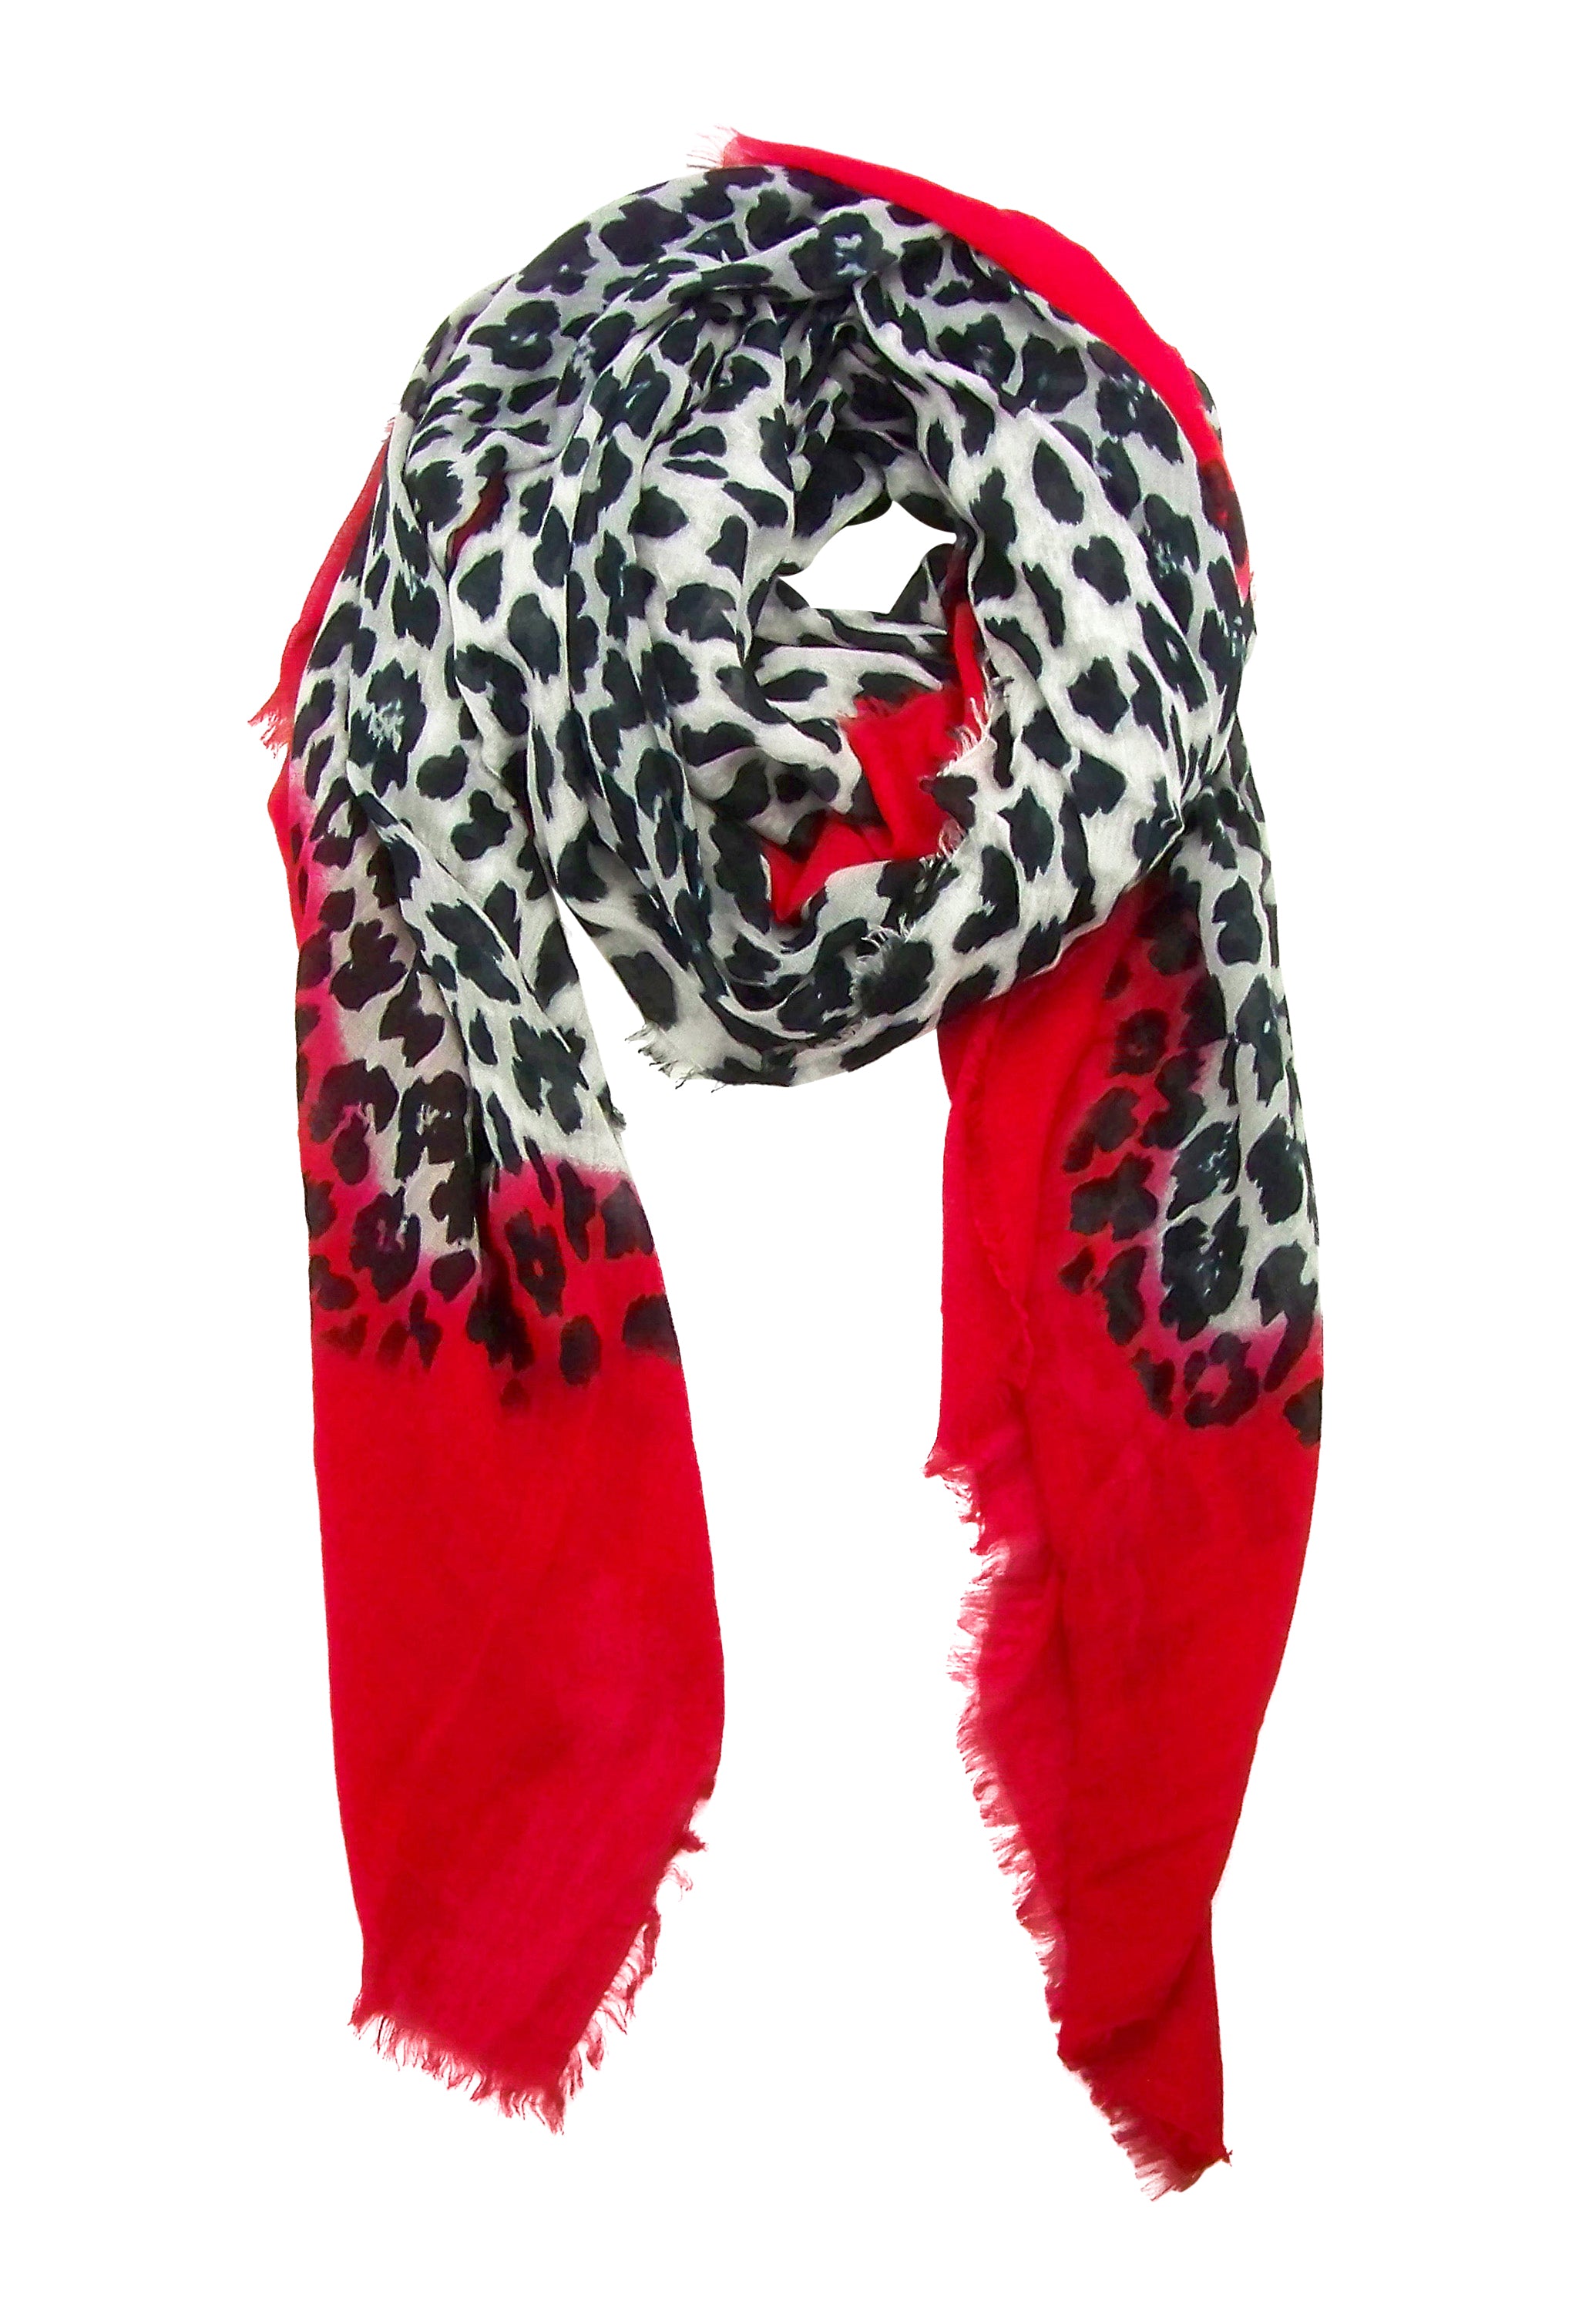 Primary Rolled Blue Pacific Animal Print Cashmere and Silk Scarf in Bright Red and Snow Grey